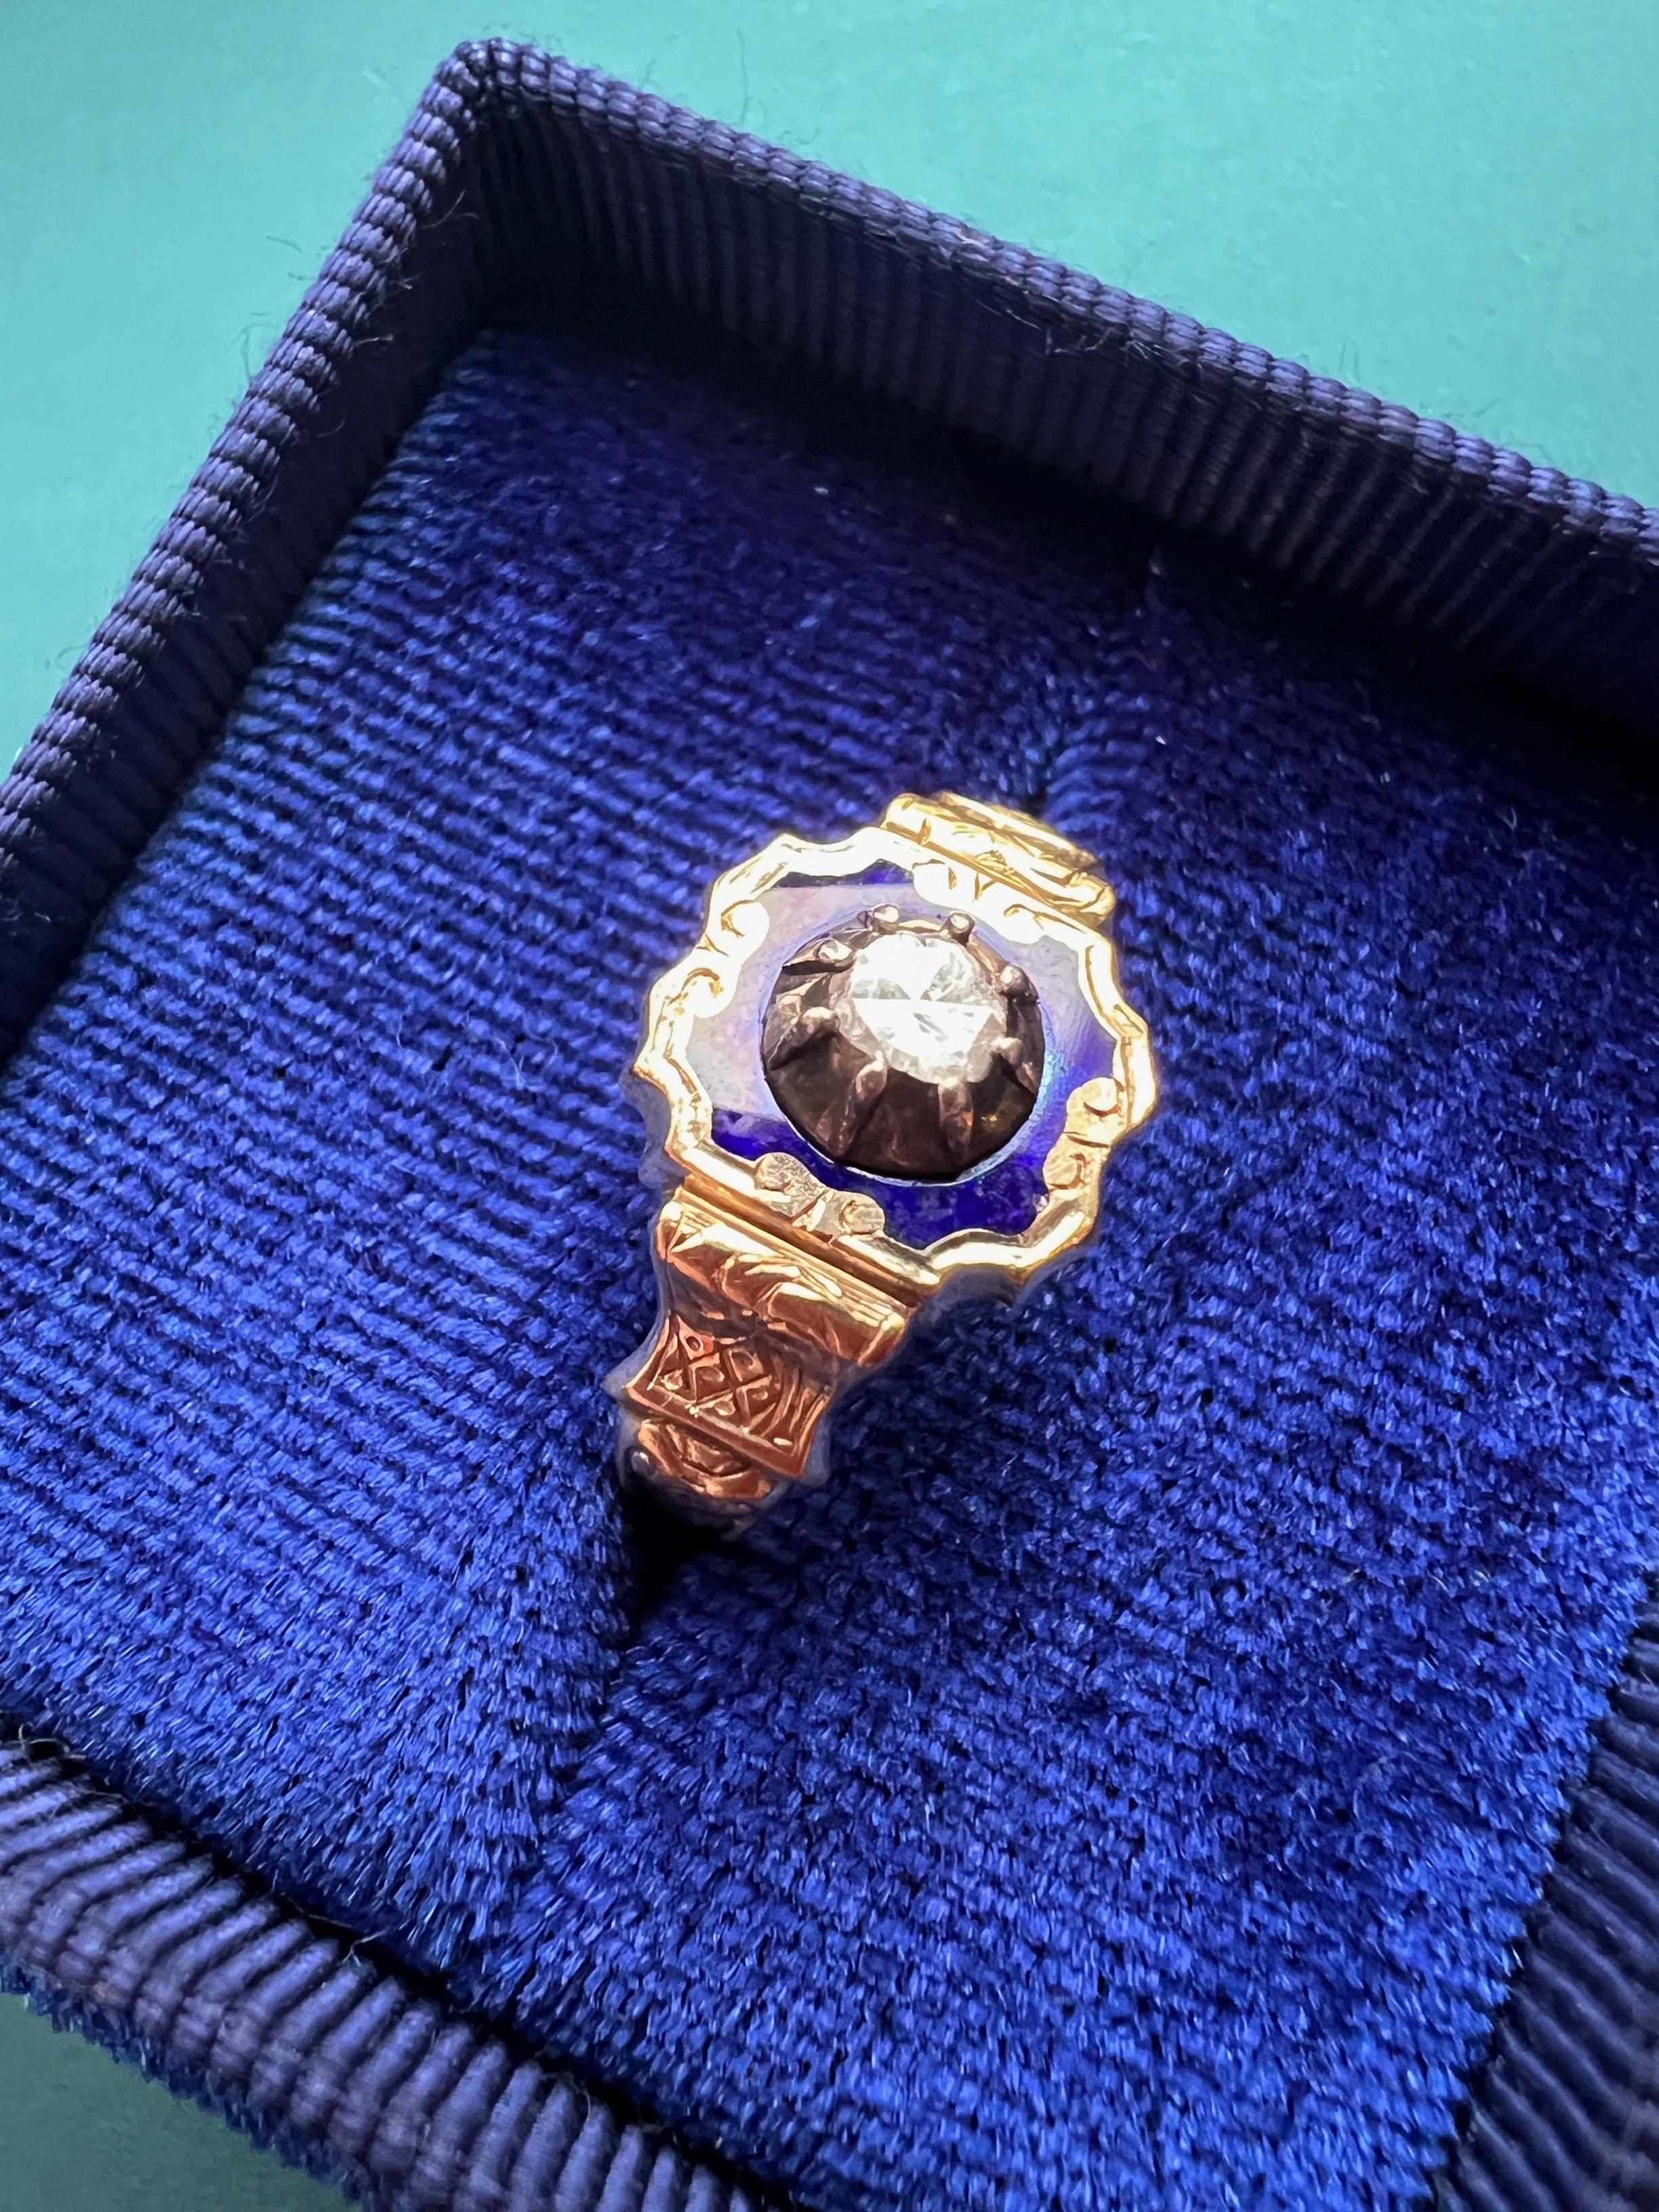 For sale a very beautiful late Georgian / early Victorian era 18k gold signet ring enameled in an elegant royal blue color. The head of the ring features a solitaire diamond of rose cut style in a claw collet setting, typical to the 18th century.